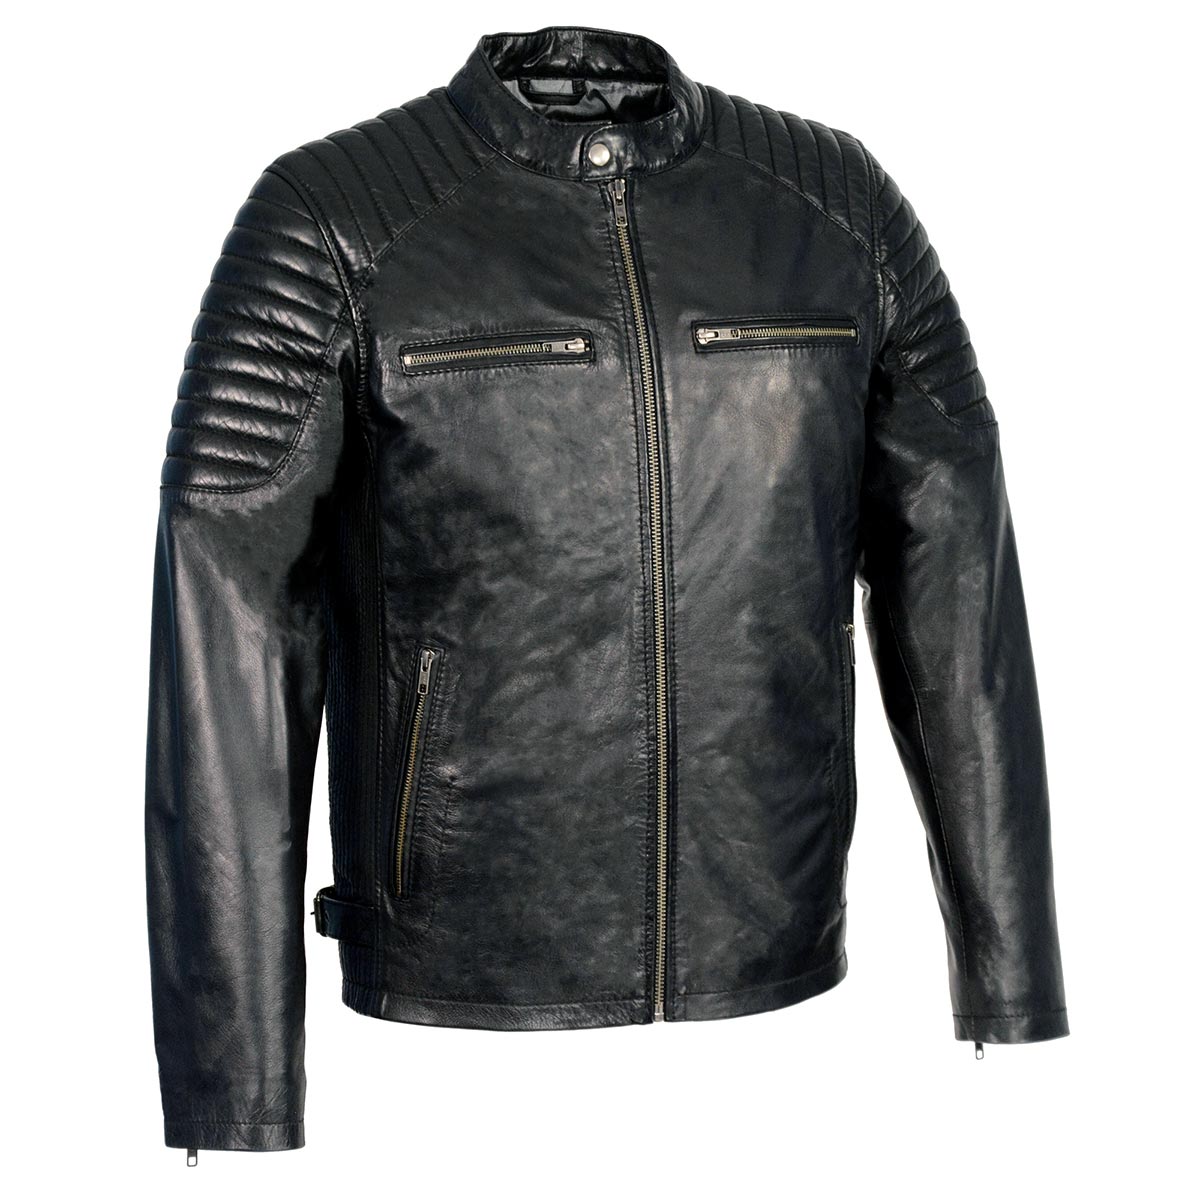 Milwaukee Leather SFM1840 Men's 'Quilted' Black Leather Fashion Jacket with Snap Button Collar